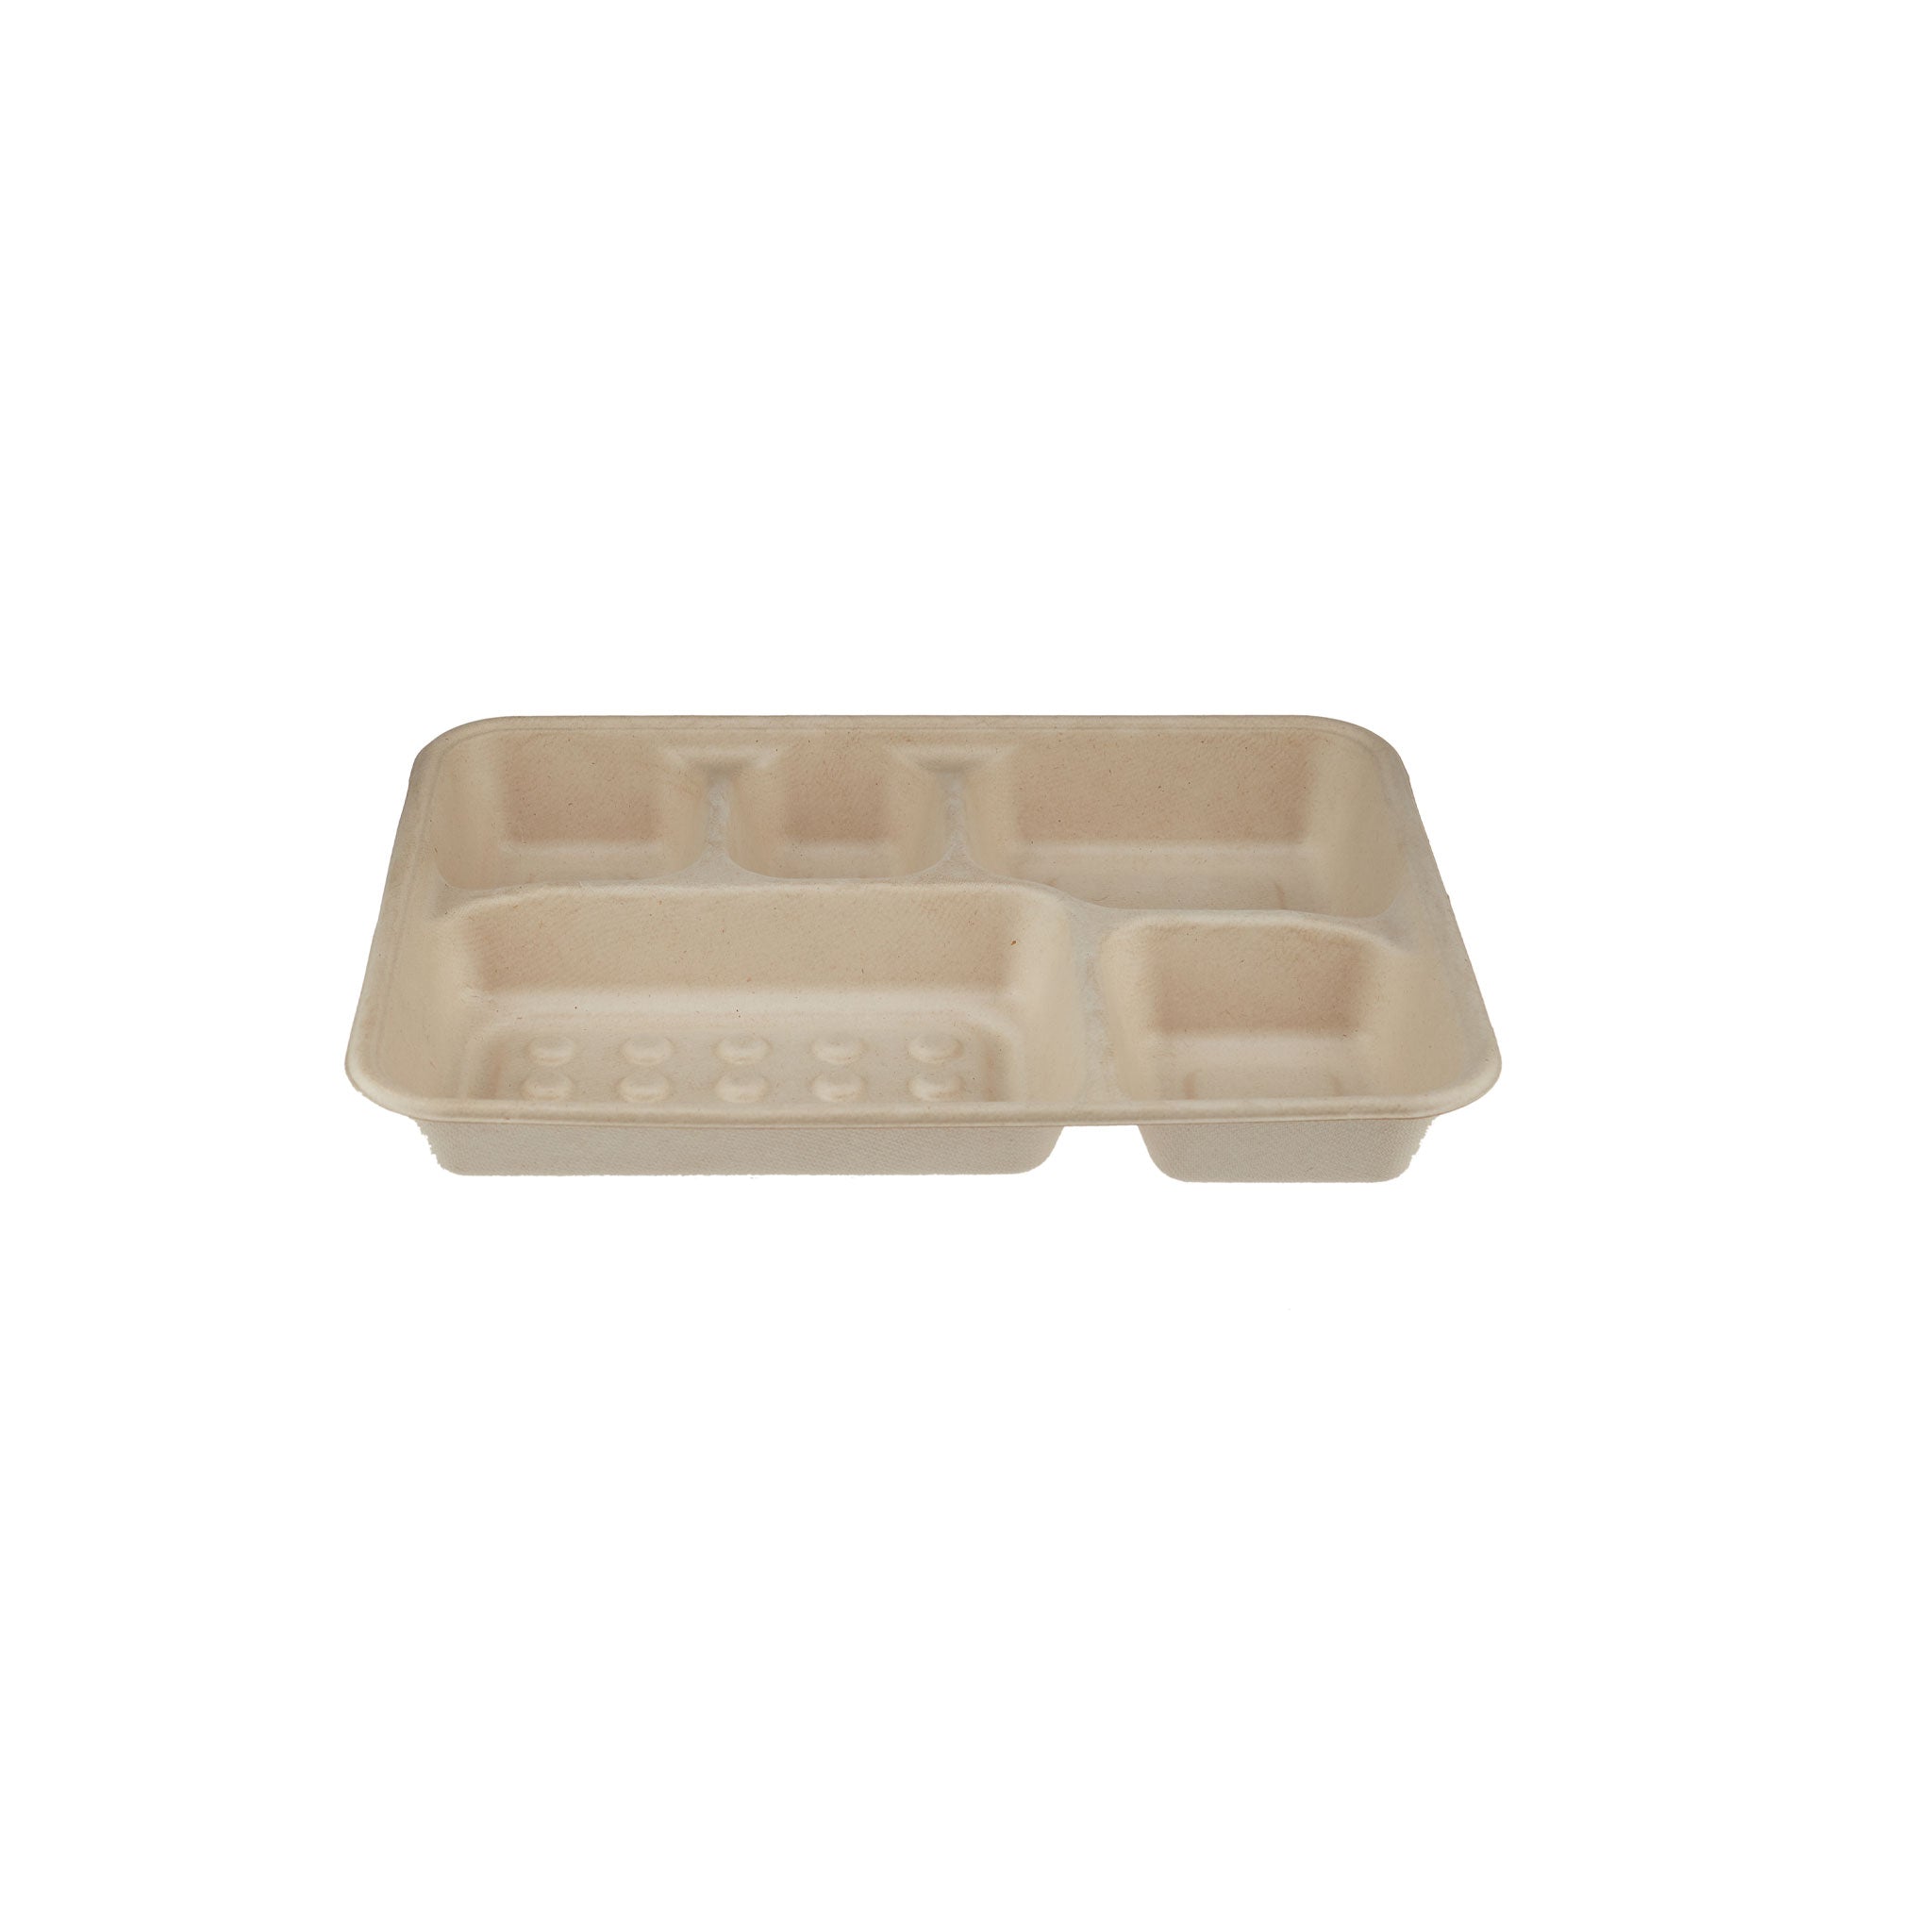 200 Pieces Bio Degradable 5 Compartment Deep Tray - Hotpack